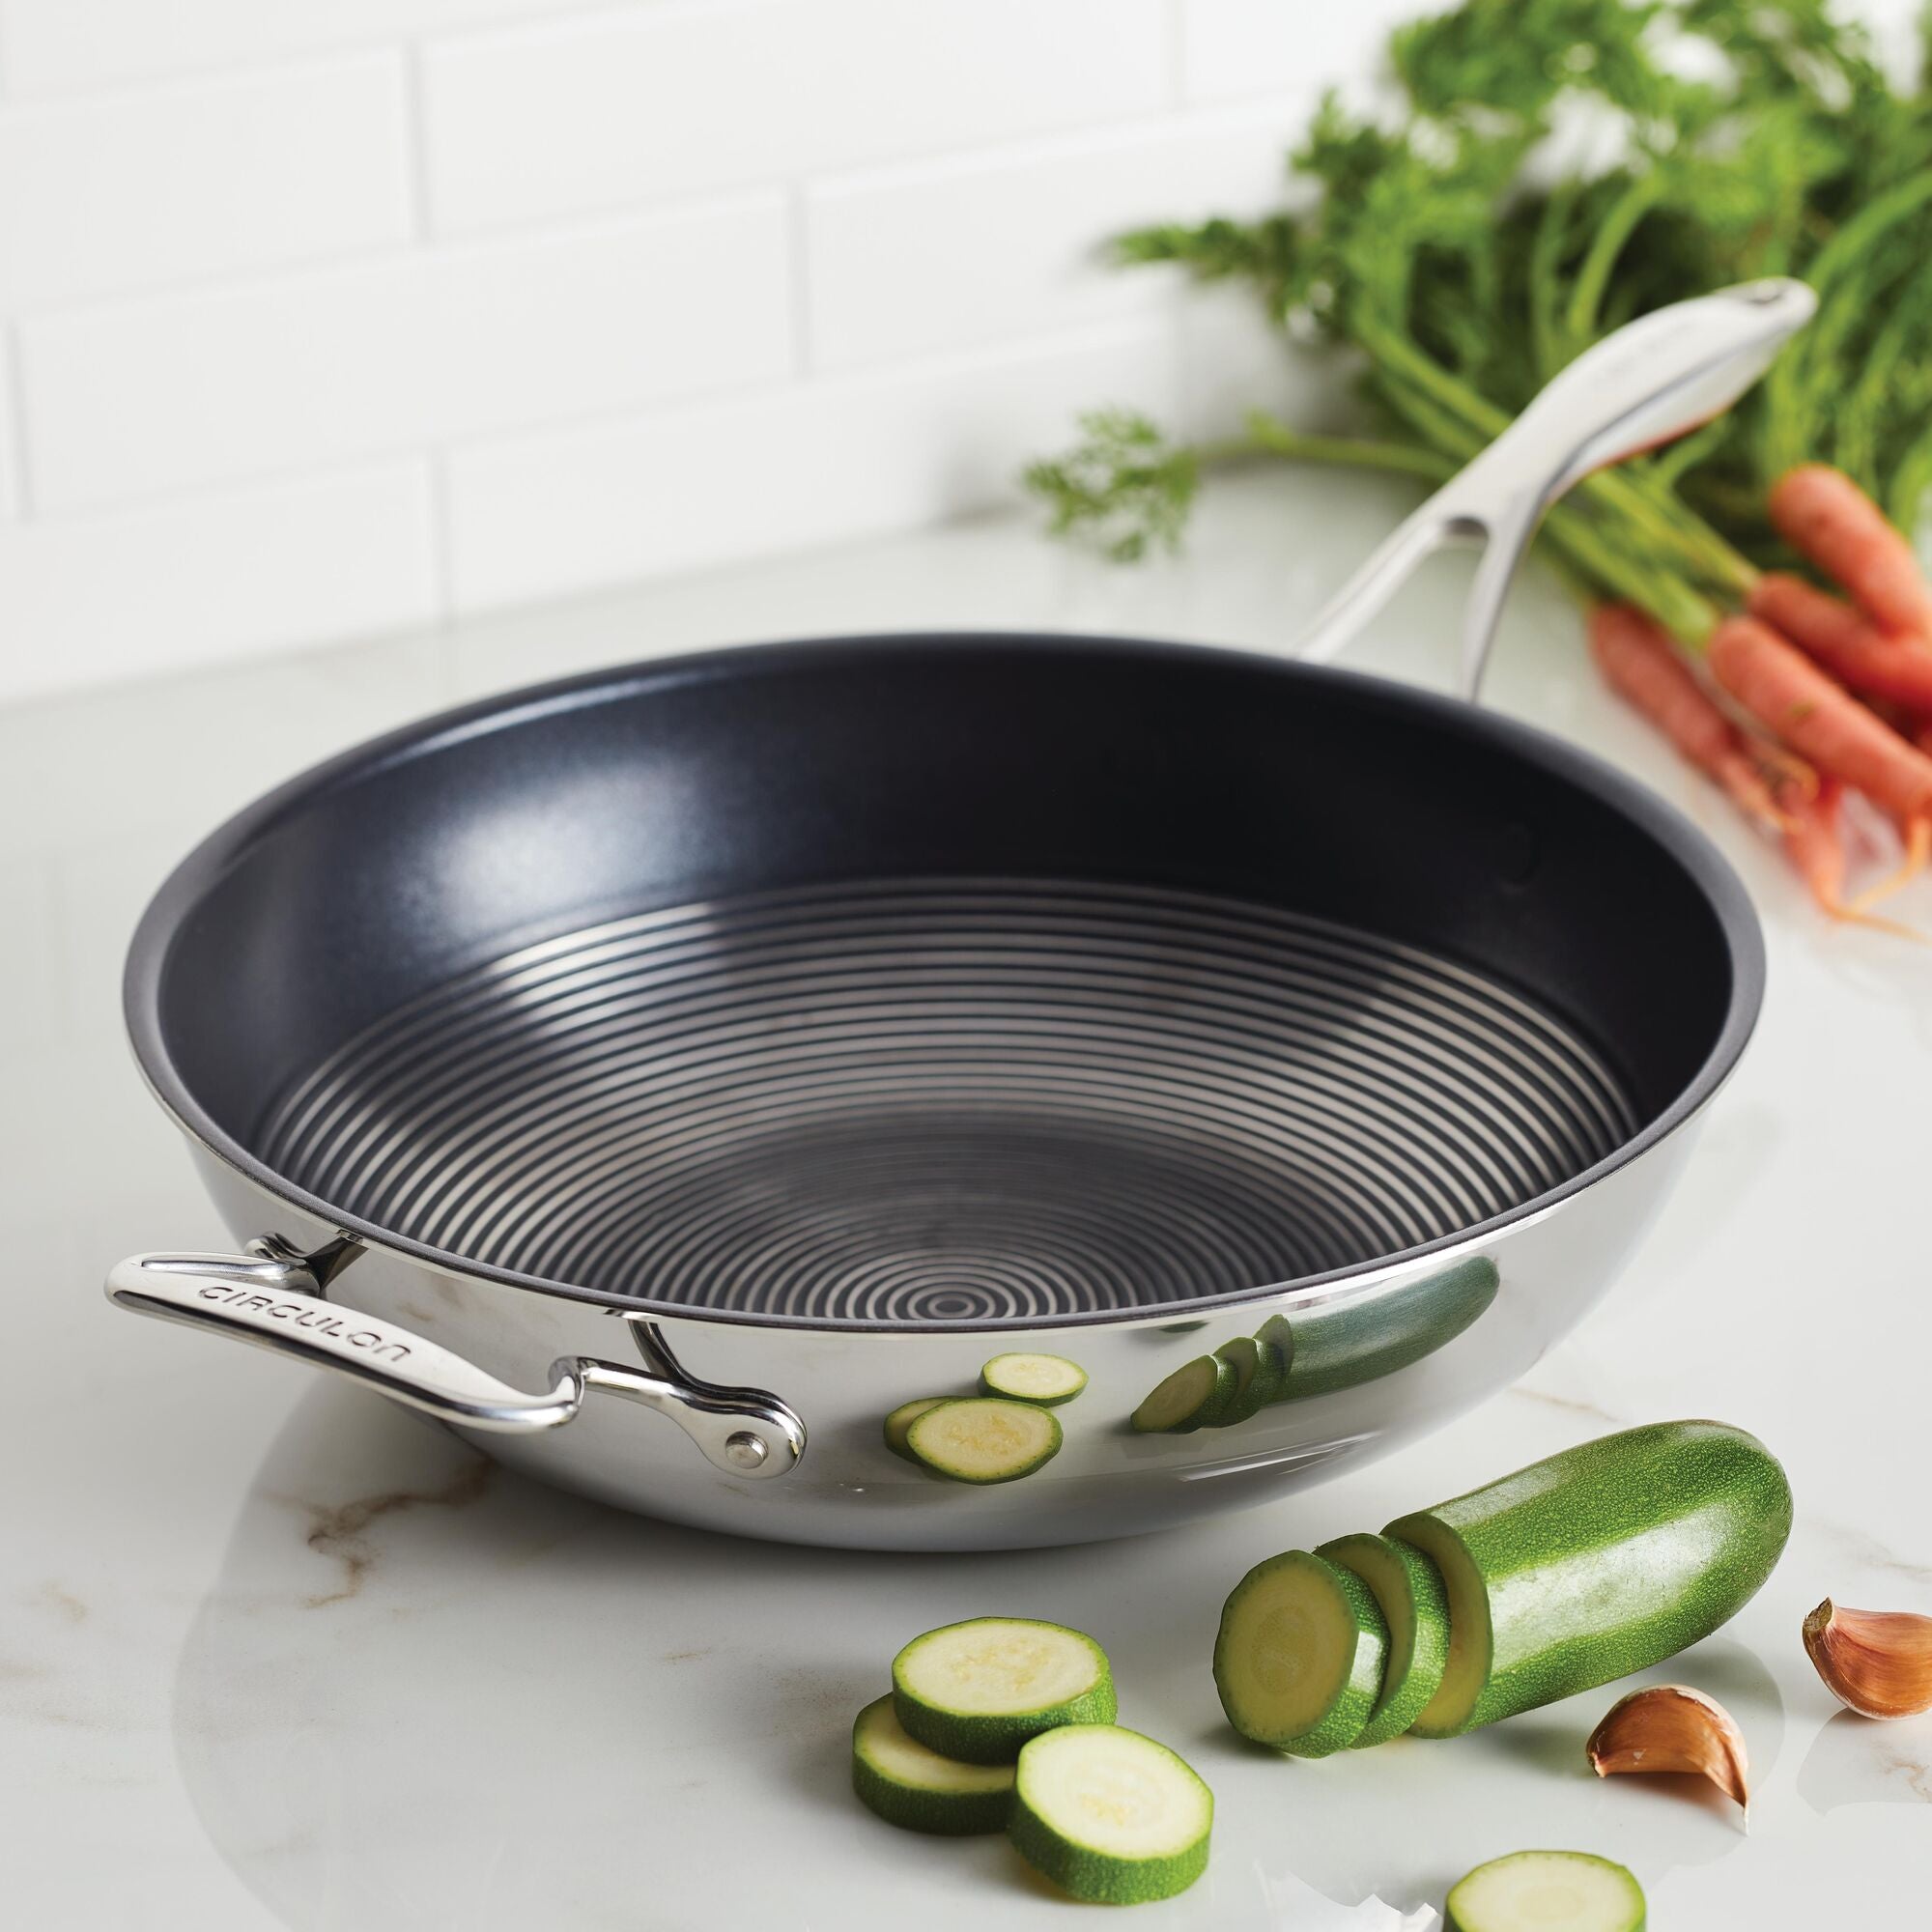 Pampered Chef 12 inch Stainless Steel Nonstick Skillet - Skillets